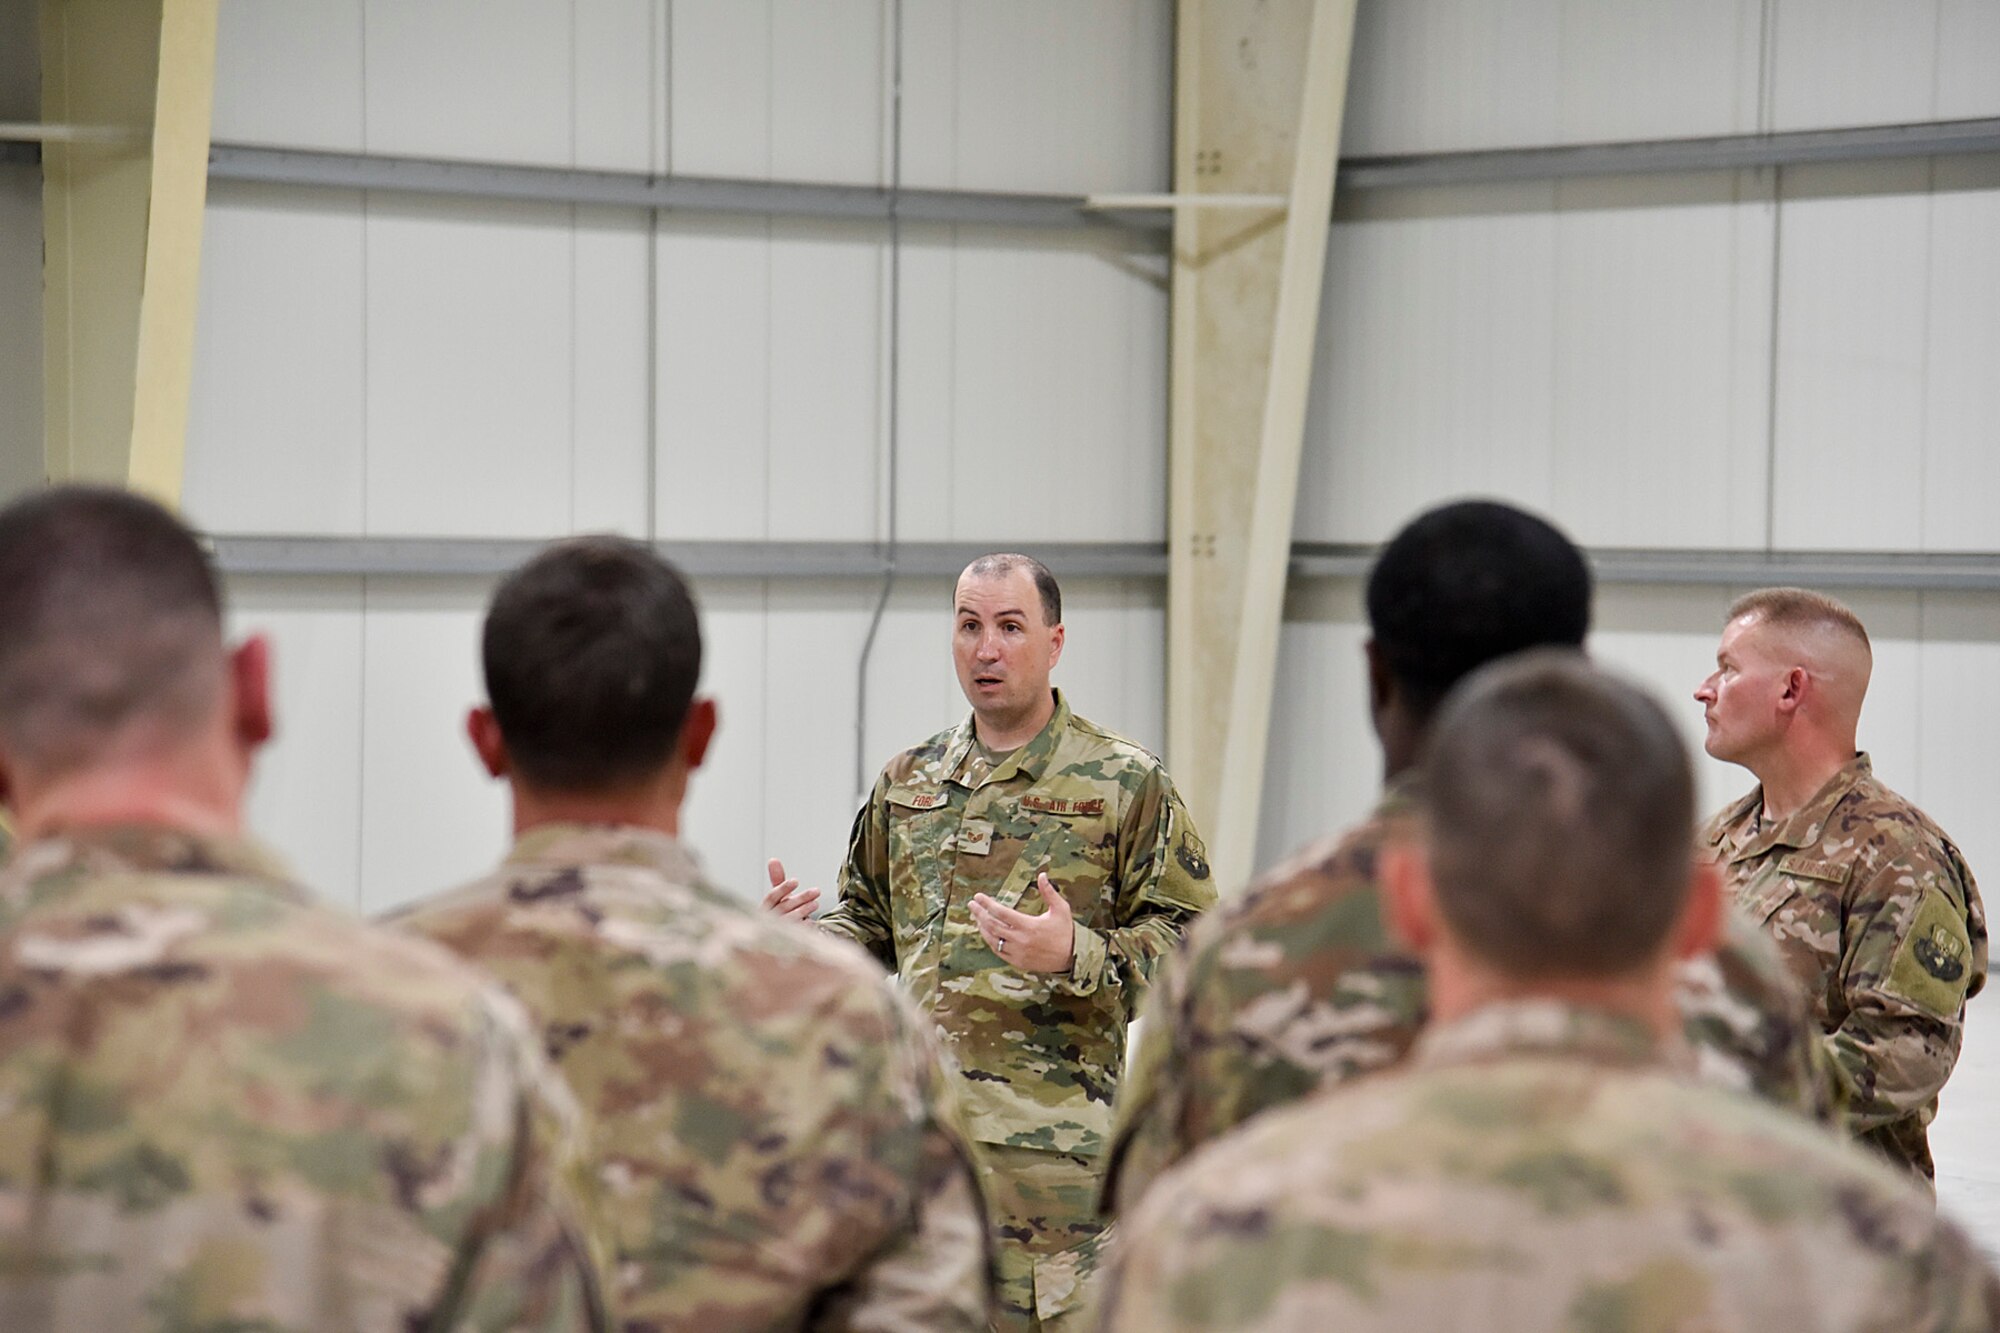 Staff Sgt. Christopher Ford, 379th Air Expeditionary Wing equal opportunity noncommissioned officer in charge, briefs the 1st Expeditionary Civil Engineering Group at Al Dhafra Air Base, United Arab Emirates, Sept. 11, 2018. The mission of EO includes enforcing a zero tolerance policy for unlawful discrimination as well as fostering positive human relations environments across squadrons, groups and wings.